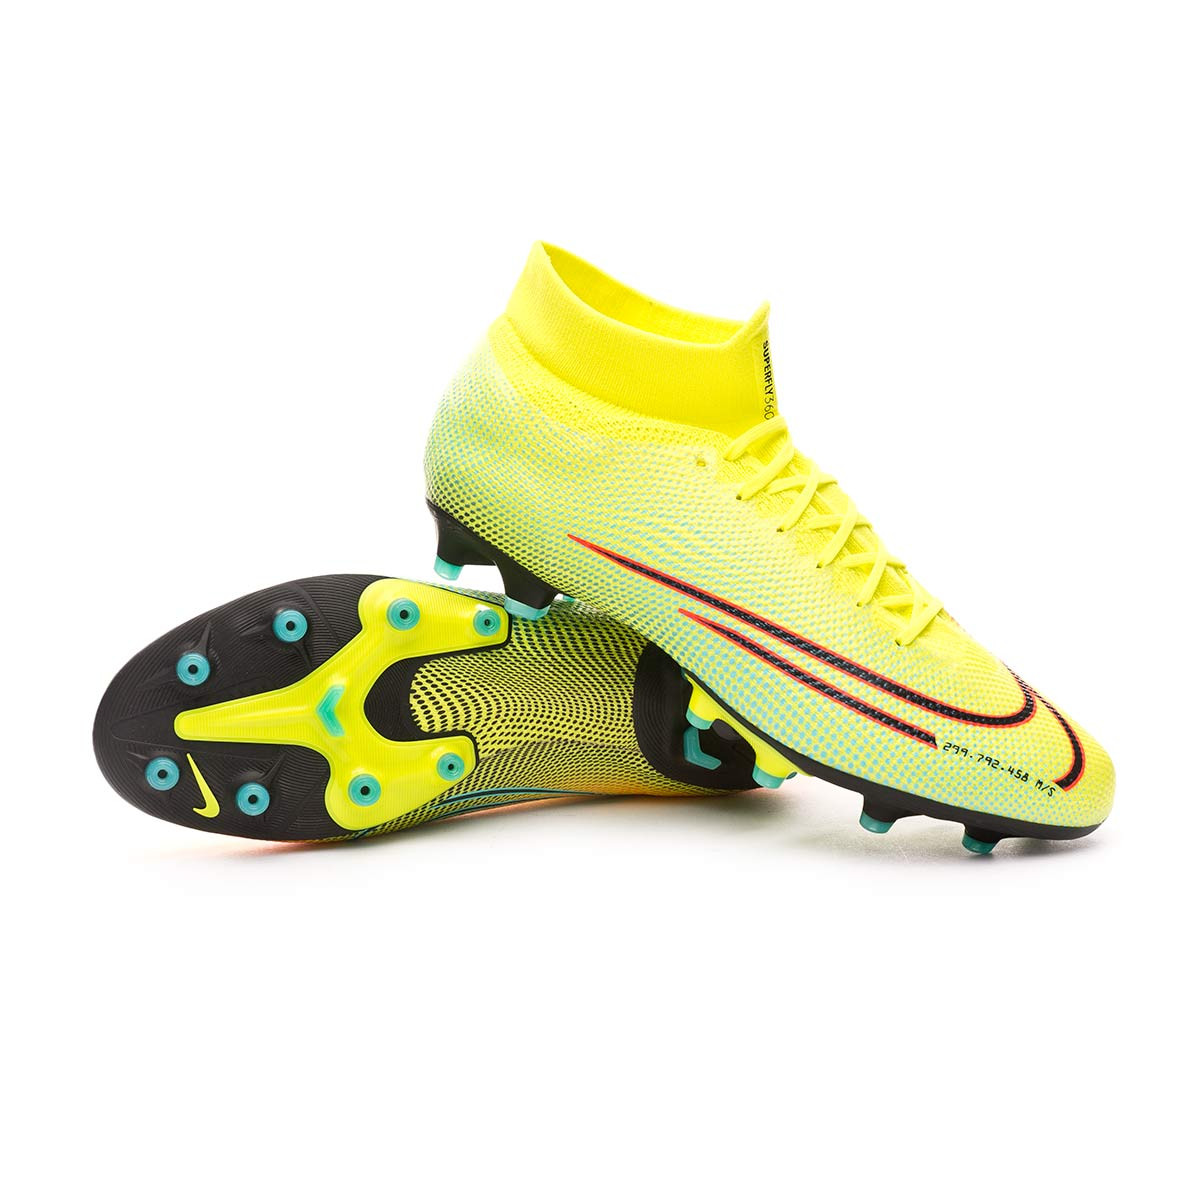 Buy Nike Mercurial Superfly 6 Pro CR7 AG Pro Only 60.